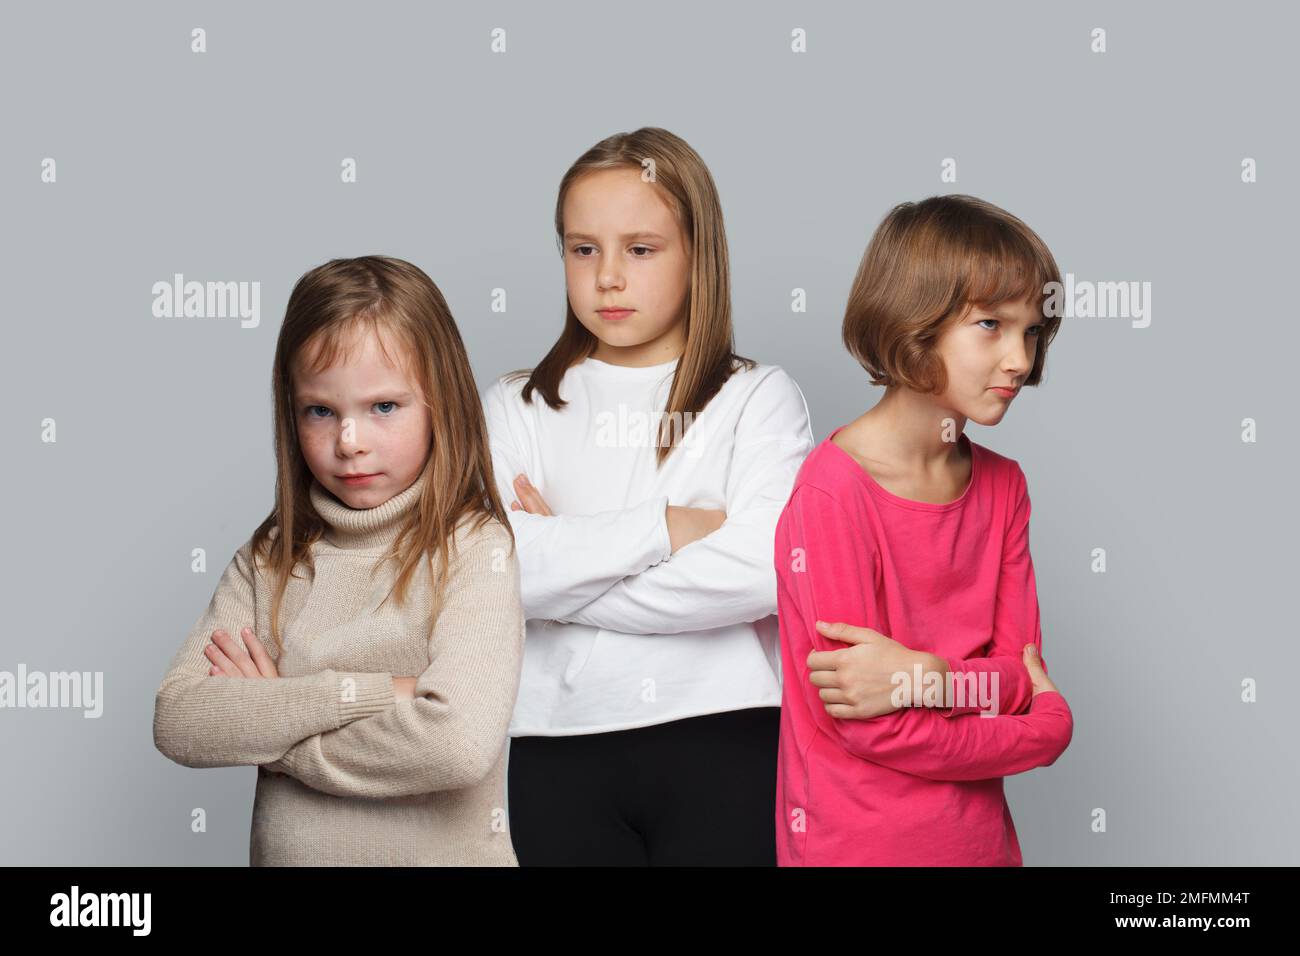 Three upset kids friends standing with crossed arms. Young girls 8-10 years old Stock Photo